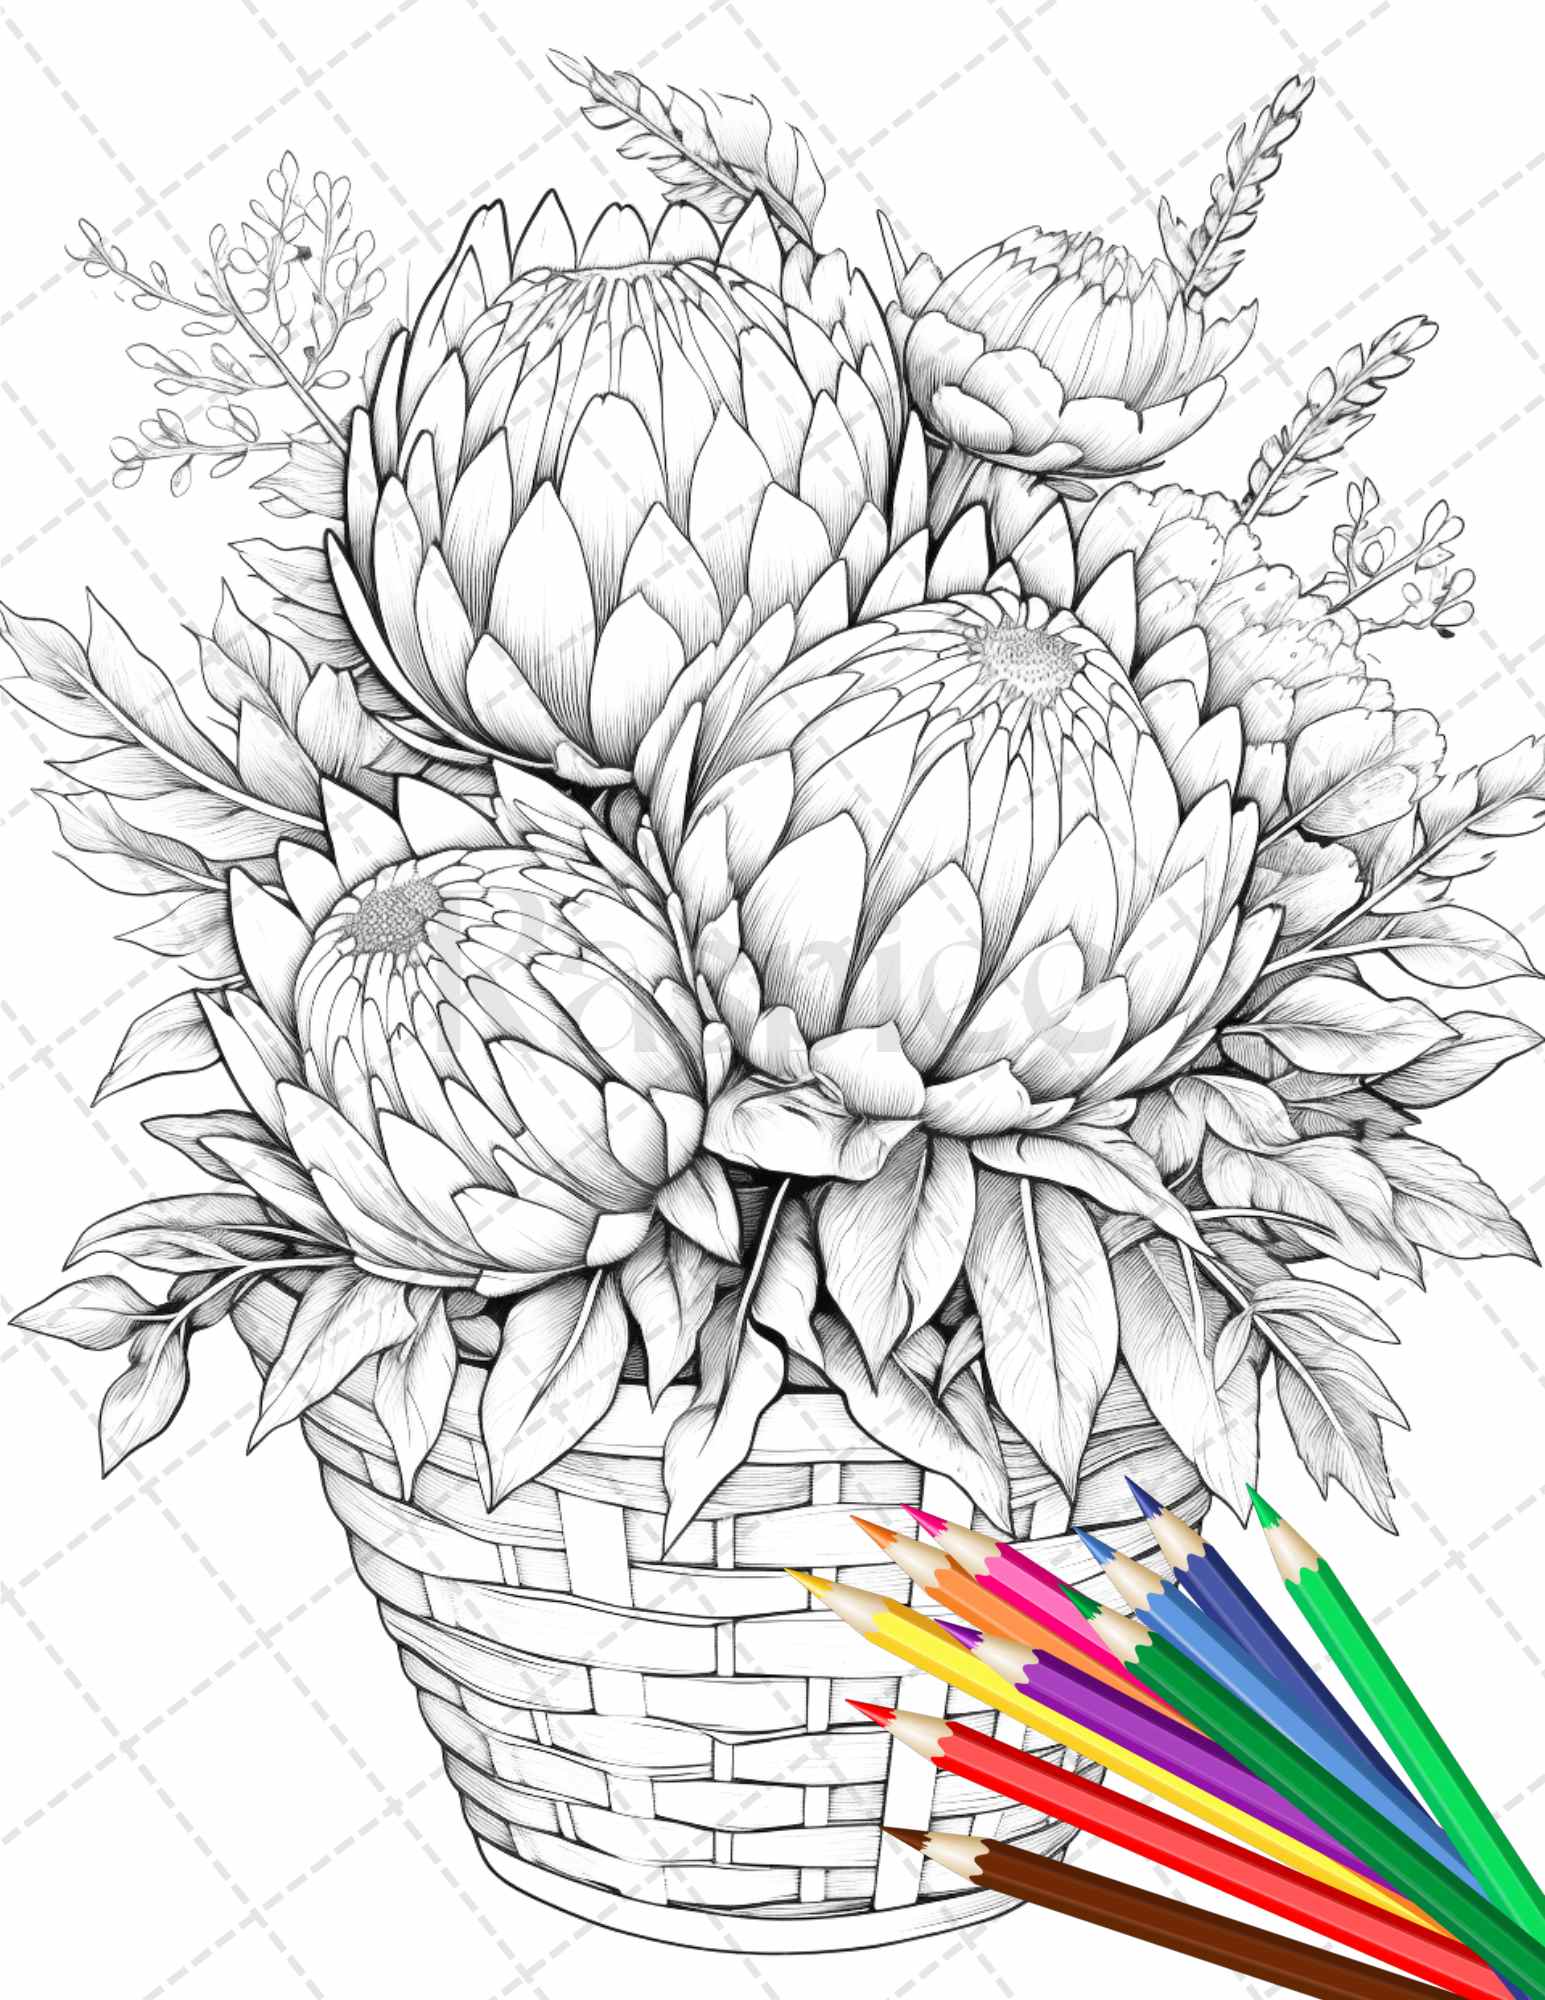 Flower baskets grayscale coloring pages for adults pdf file instan â coloring